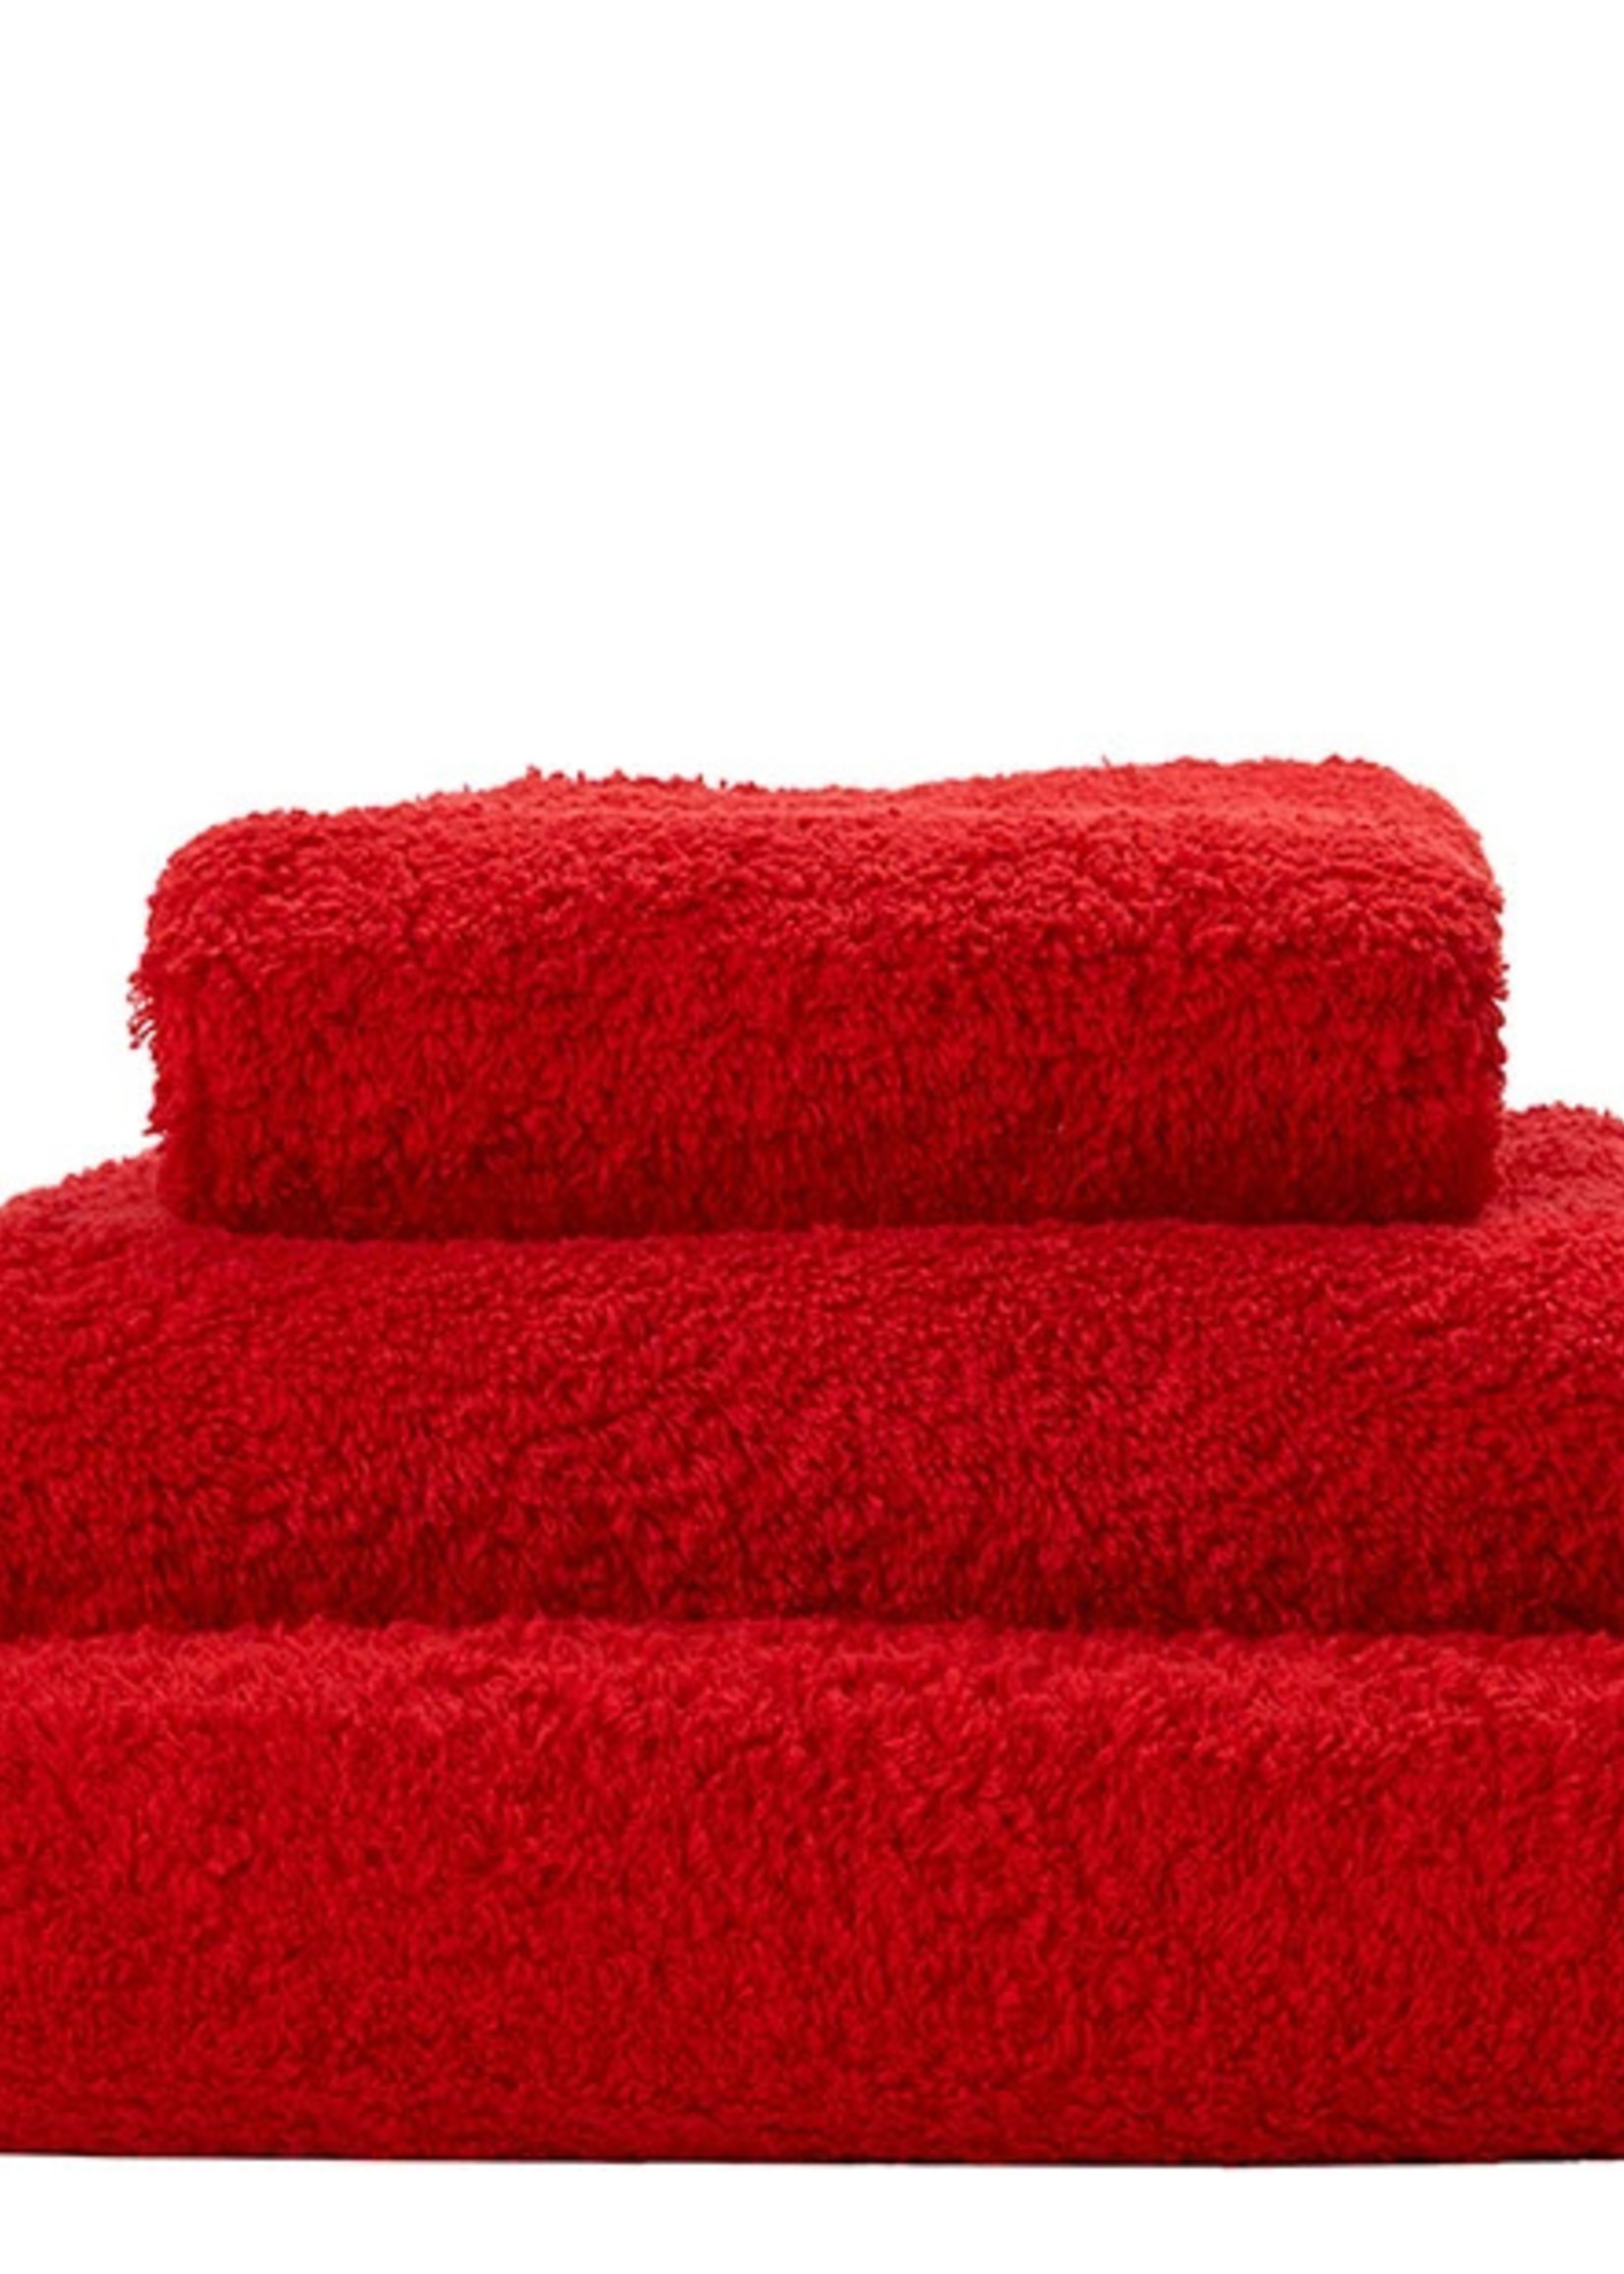 Abyss & Habidecor Super Pile Rouge Towels